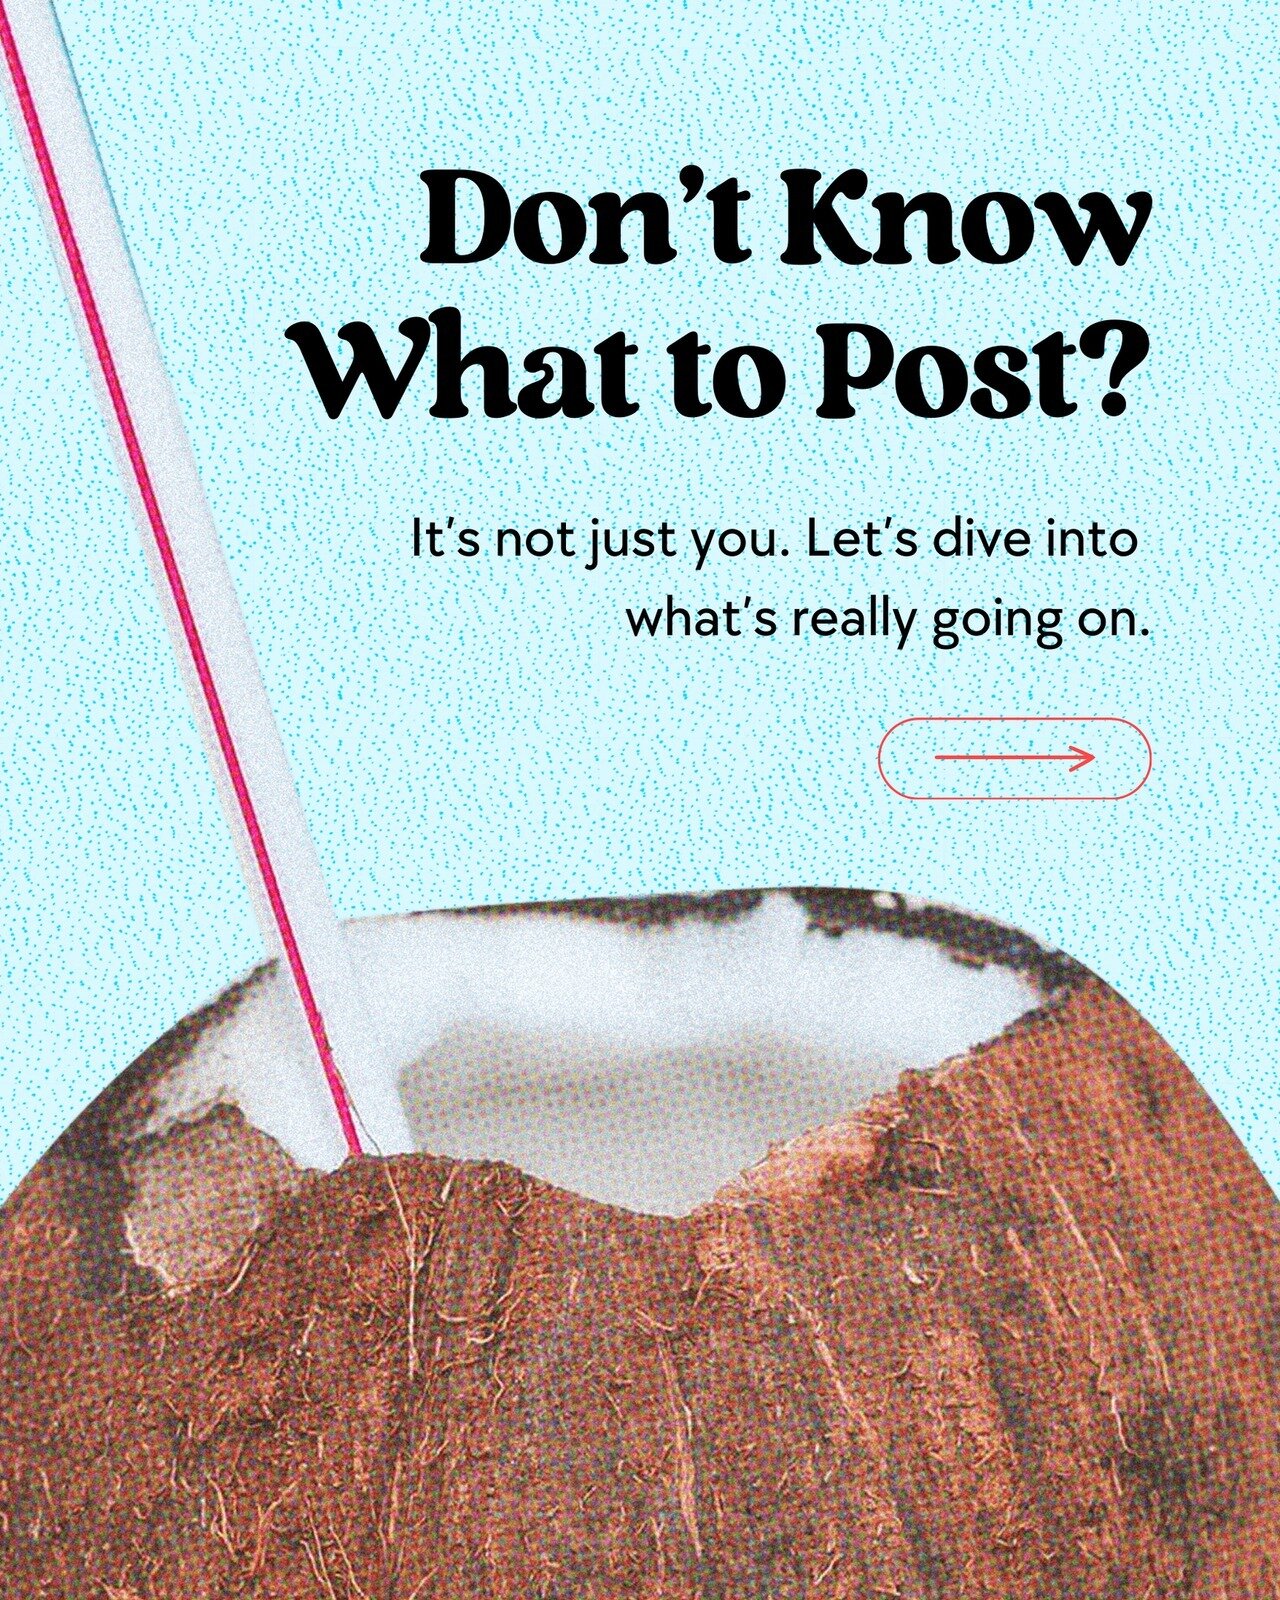 Not sure what to post? 🥥 Let's crack open your brand's potential! Swipe for more branding insights. ⁠
⁠
⁠
#SmallBusinessTips #BrandStrategy #SocialMediaStrategy #SocialMediaHelp #ContentMarketing #MarketingTips